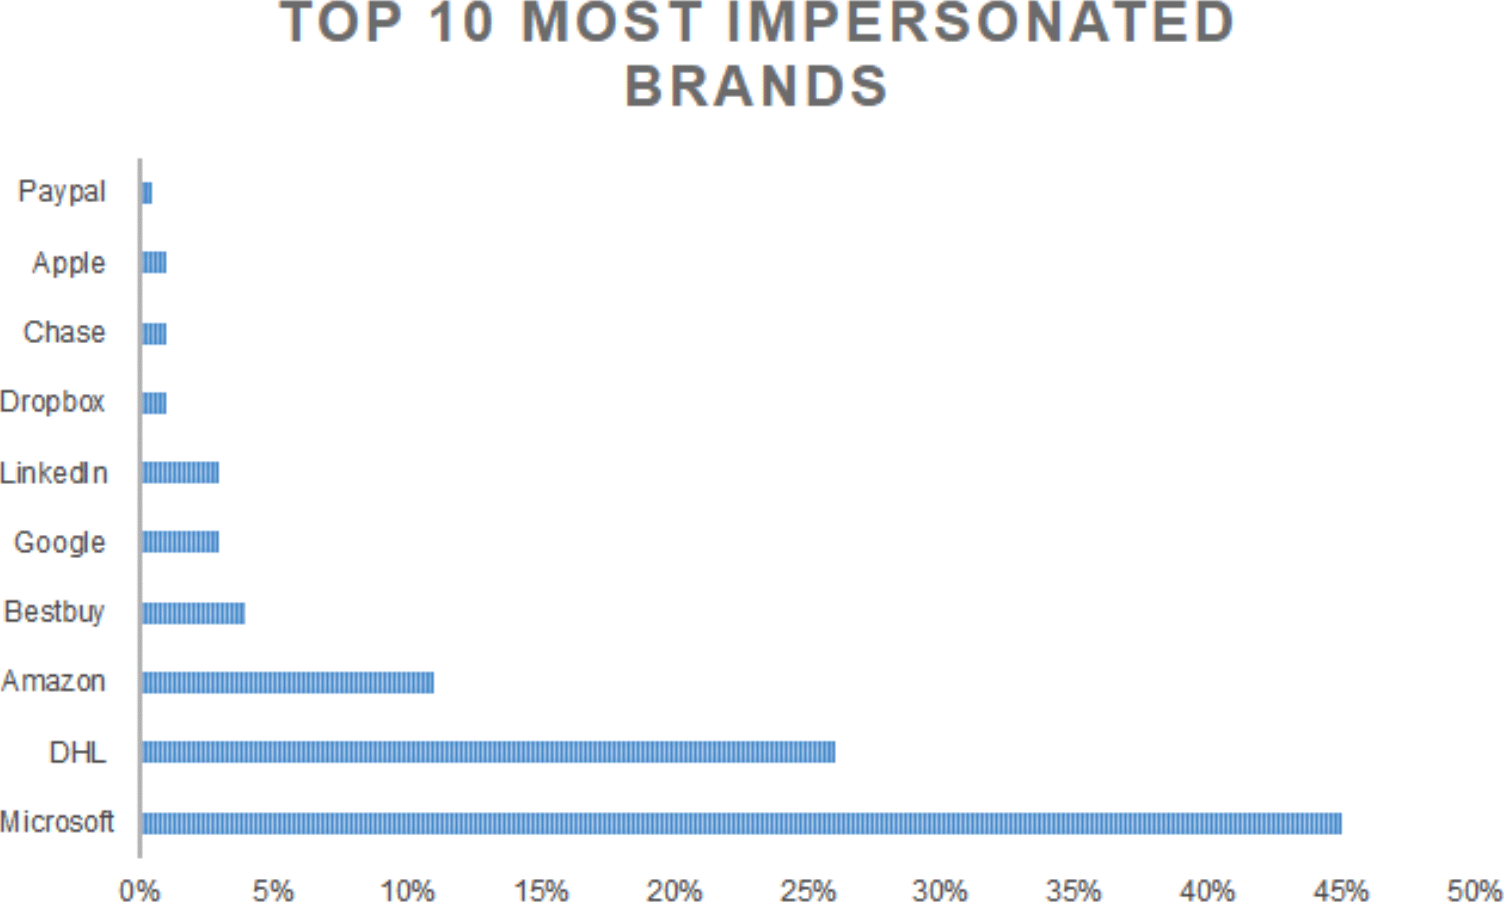 Q2 2021 Top 10 Most Impersonated Brands in Domains 22